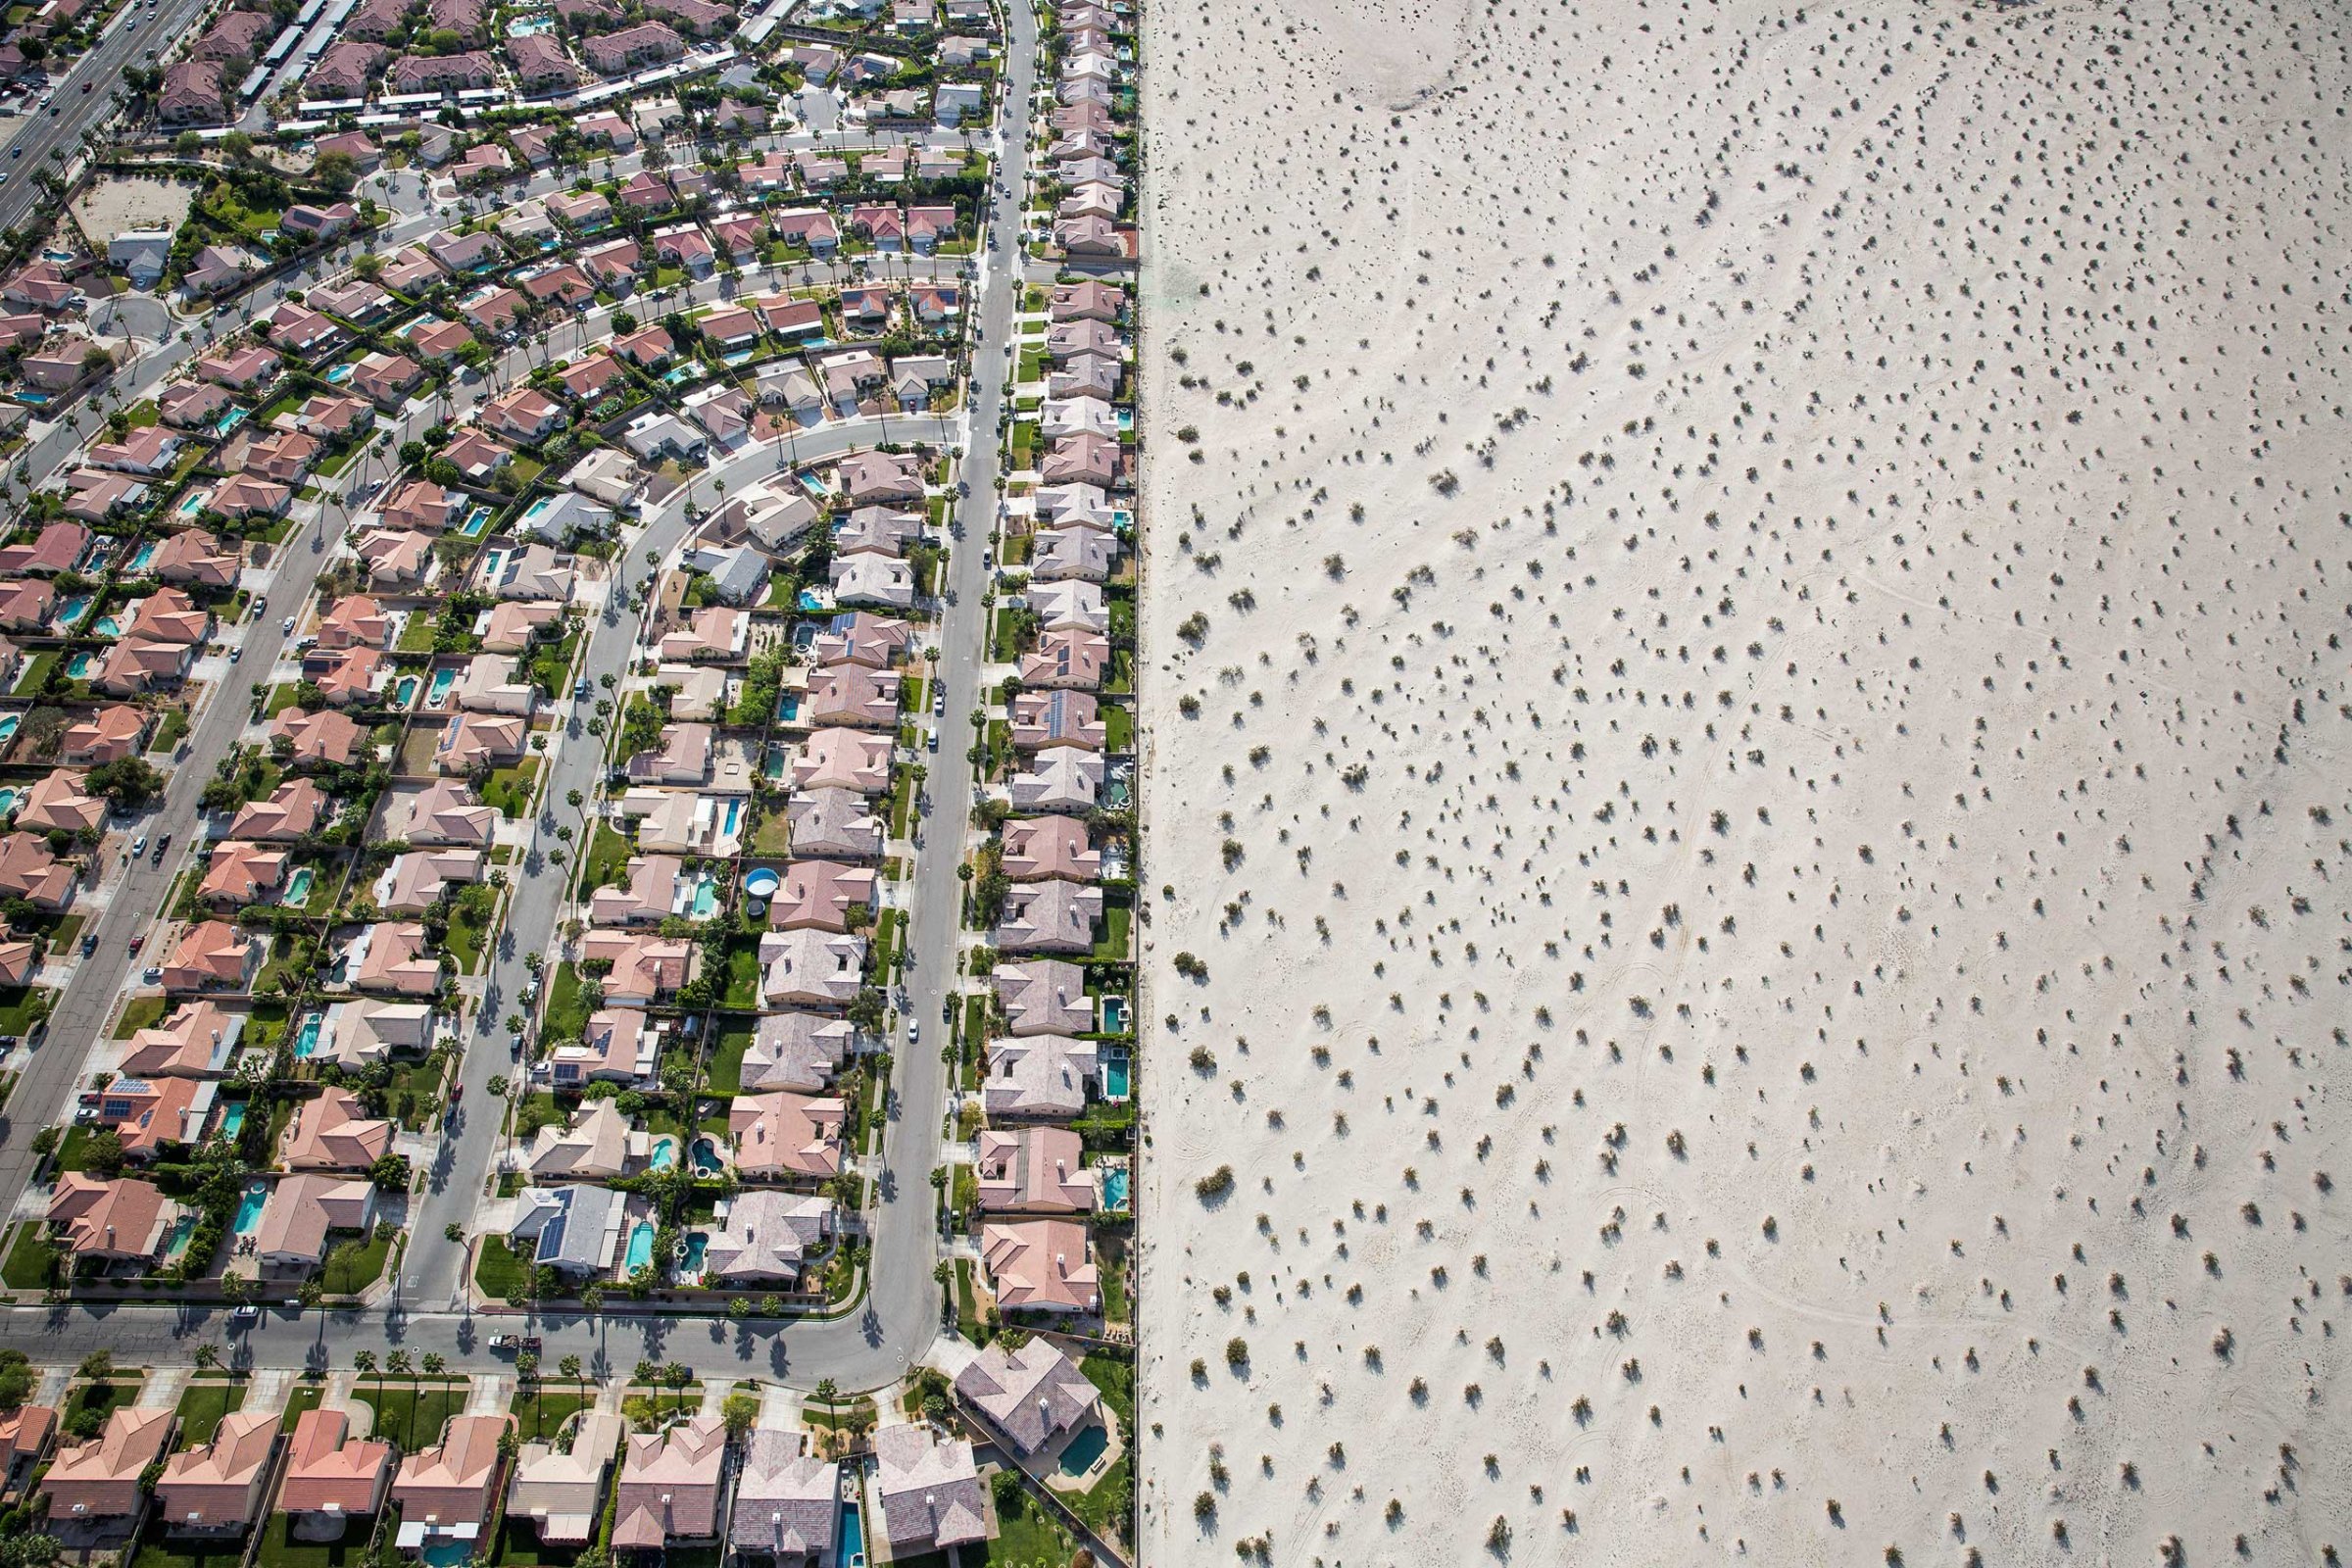 A housing development on the edge of undeveloped desert in Cathedral City, Calif.